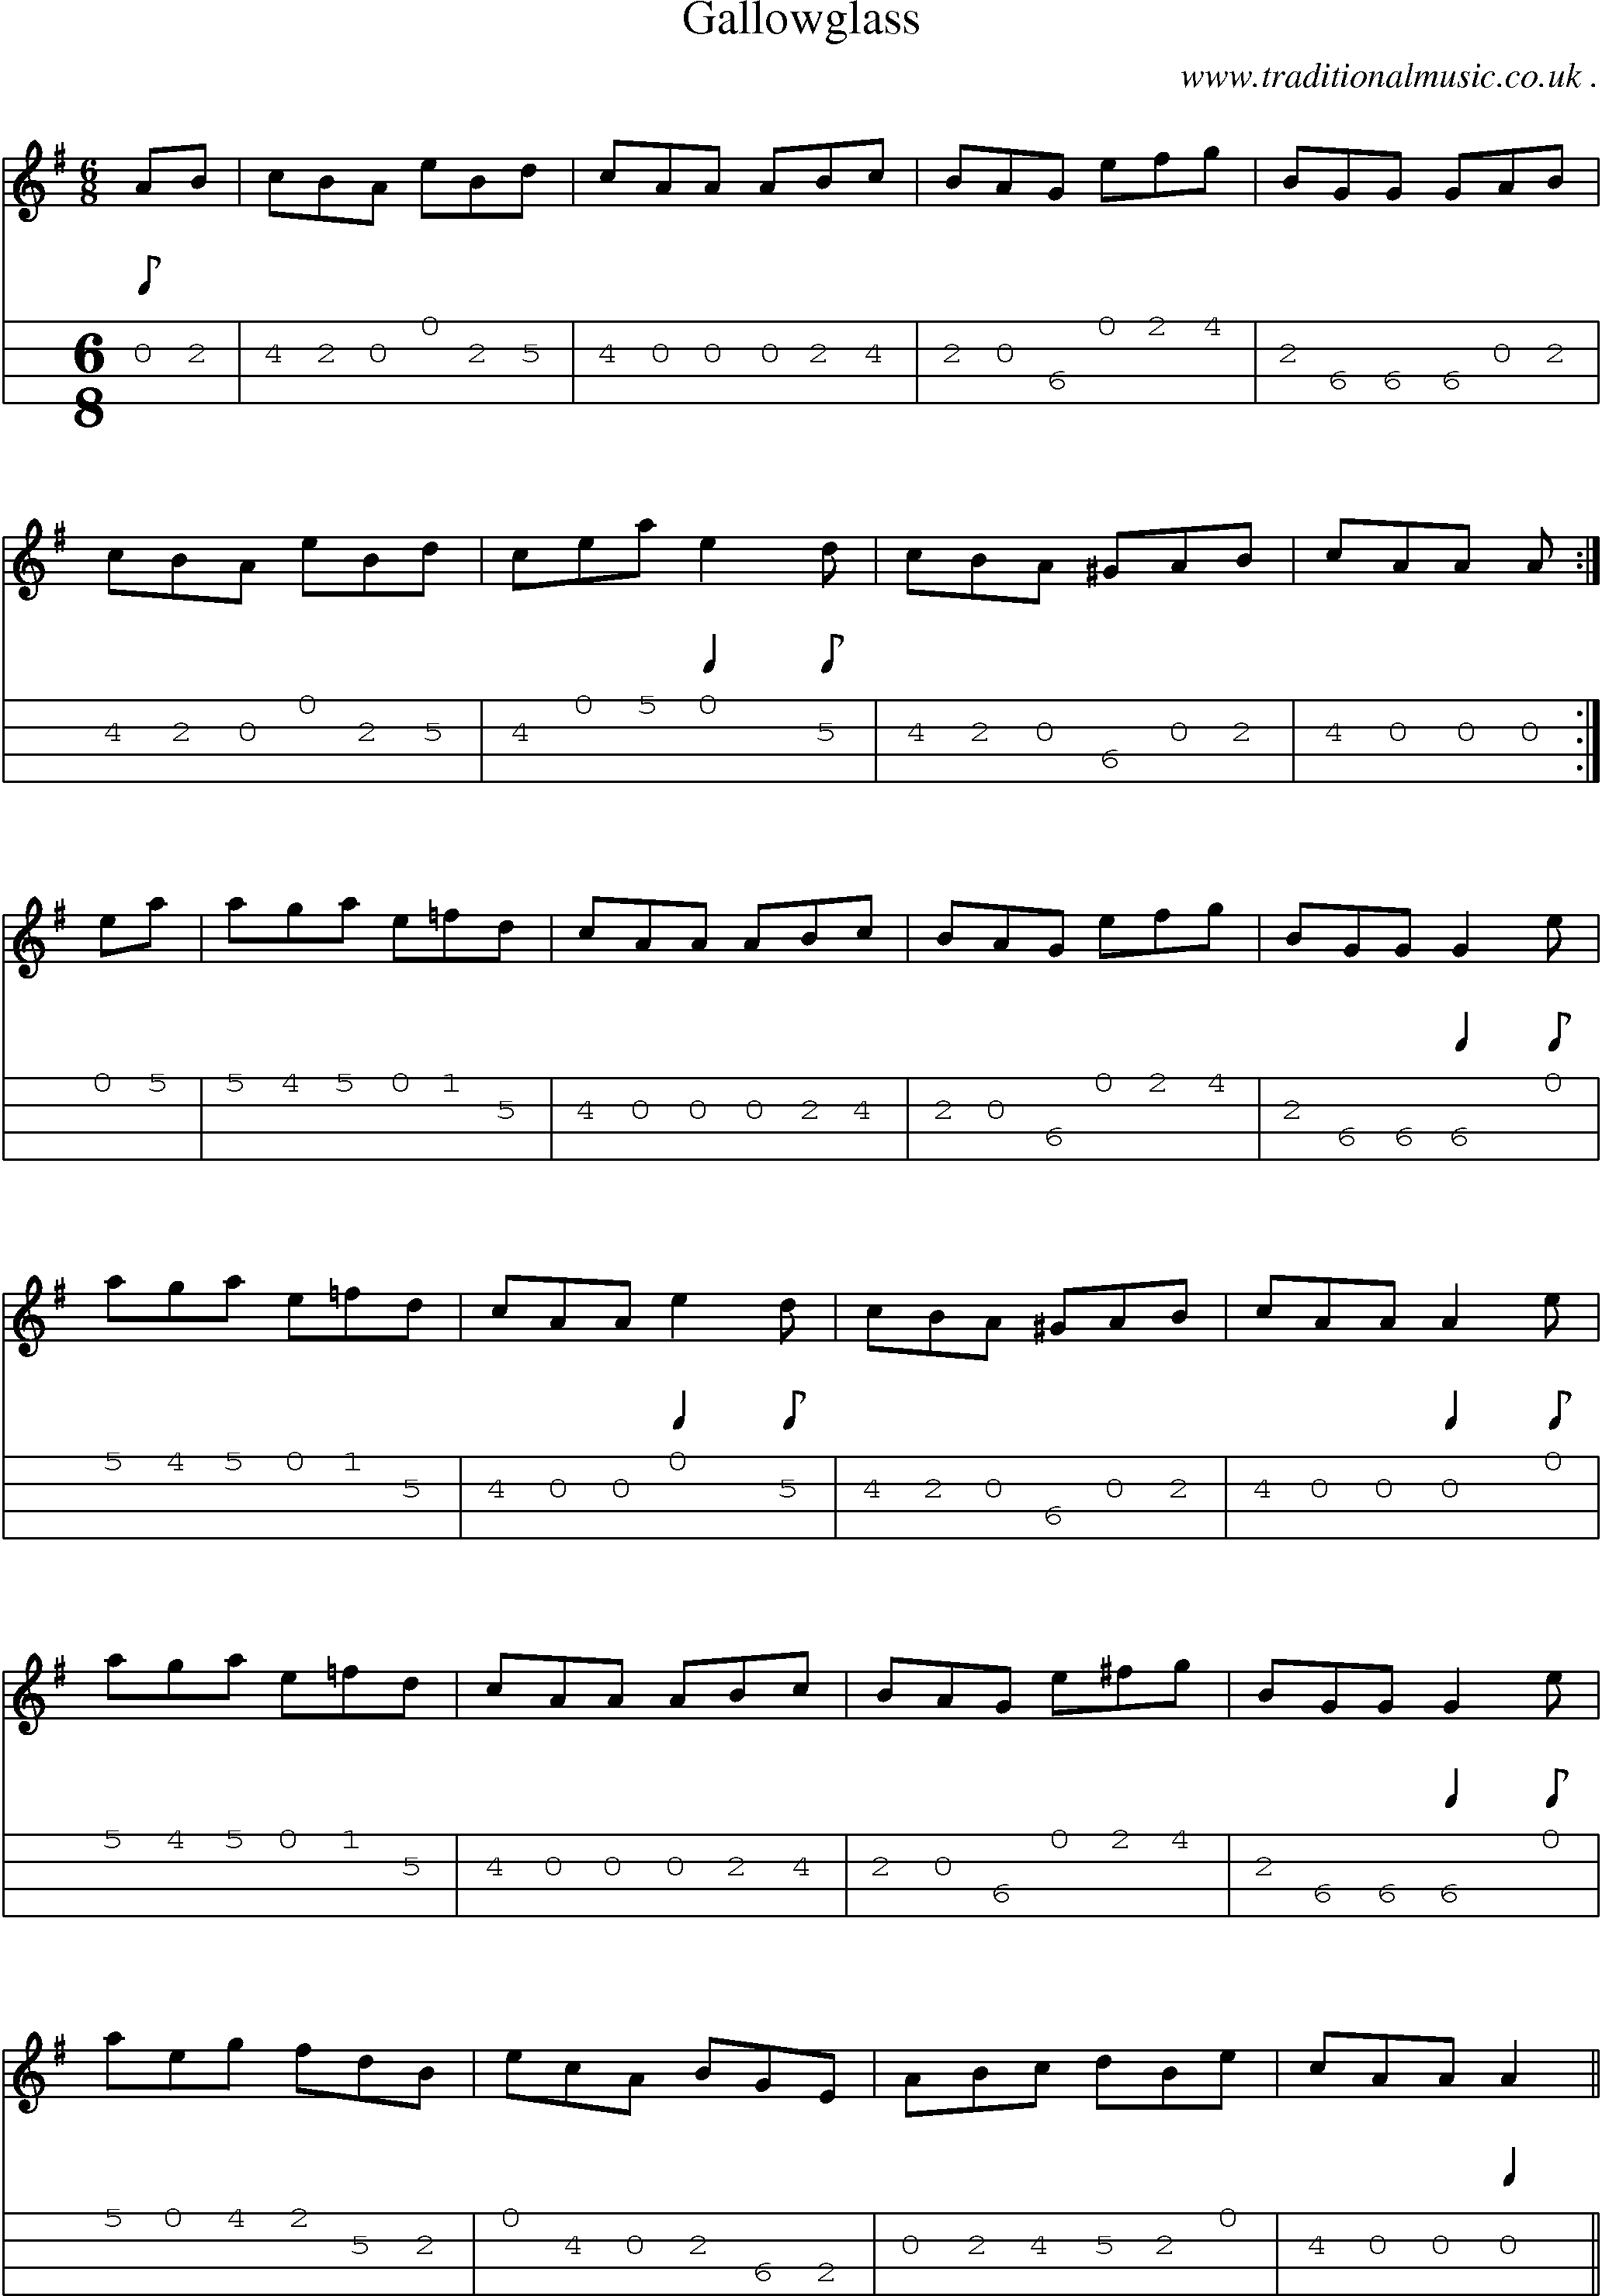 Sheet-Music and Mandolin Tabs for Gallowglass